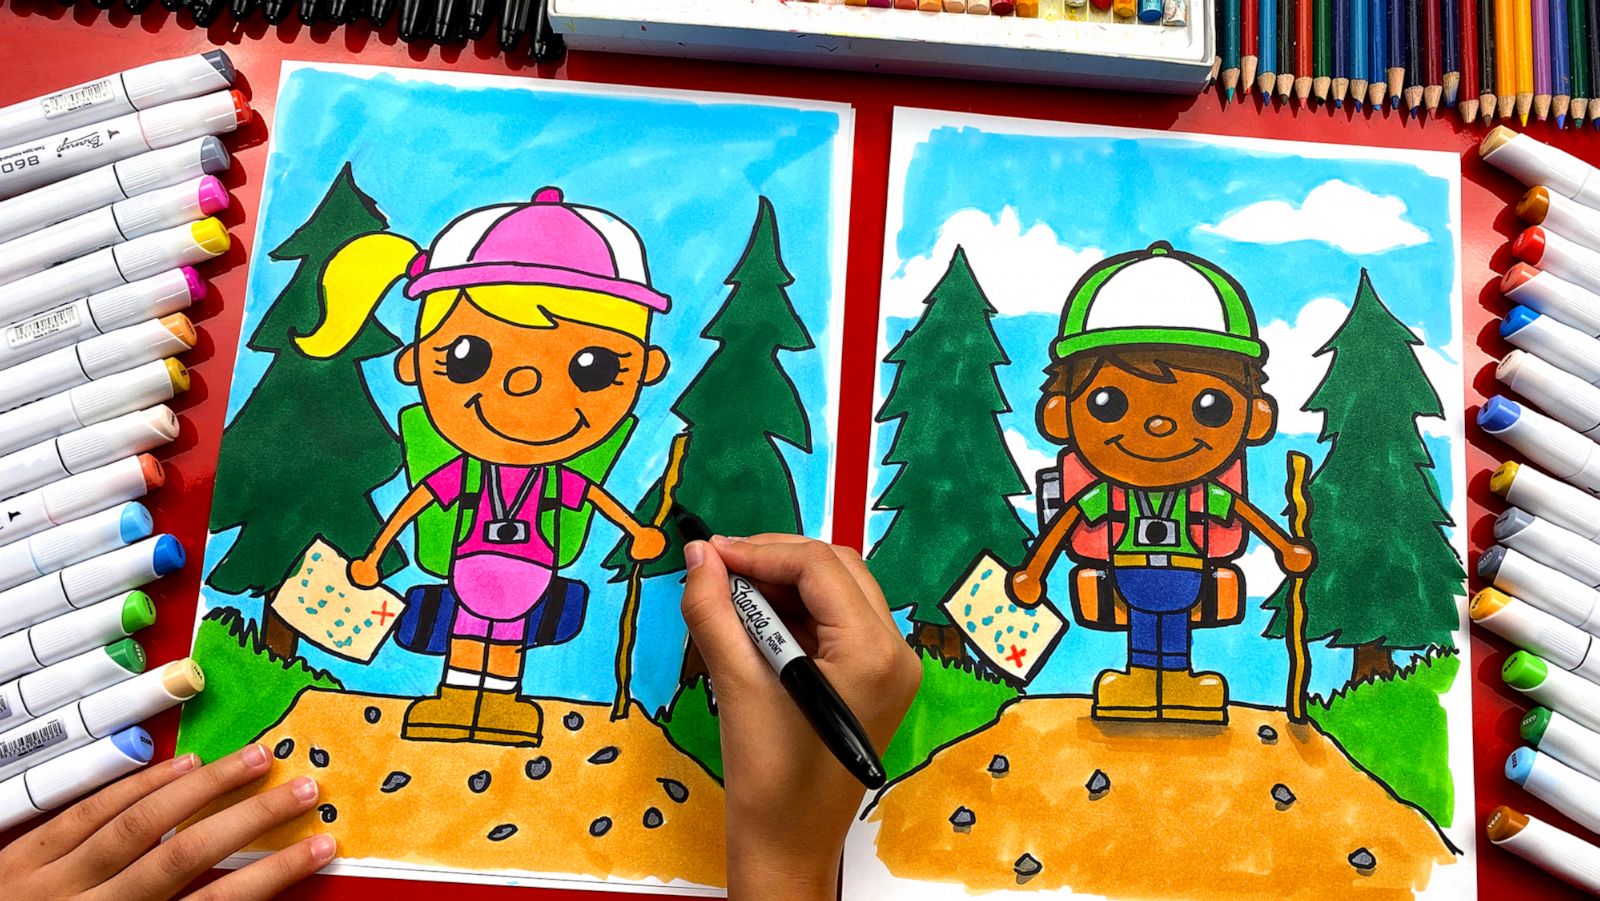 How To Draw A Book And Pencil - Art For Kids Hub 